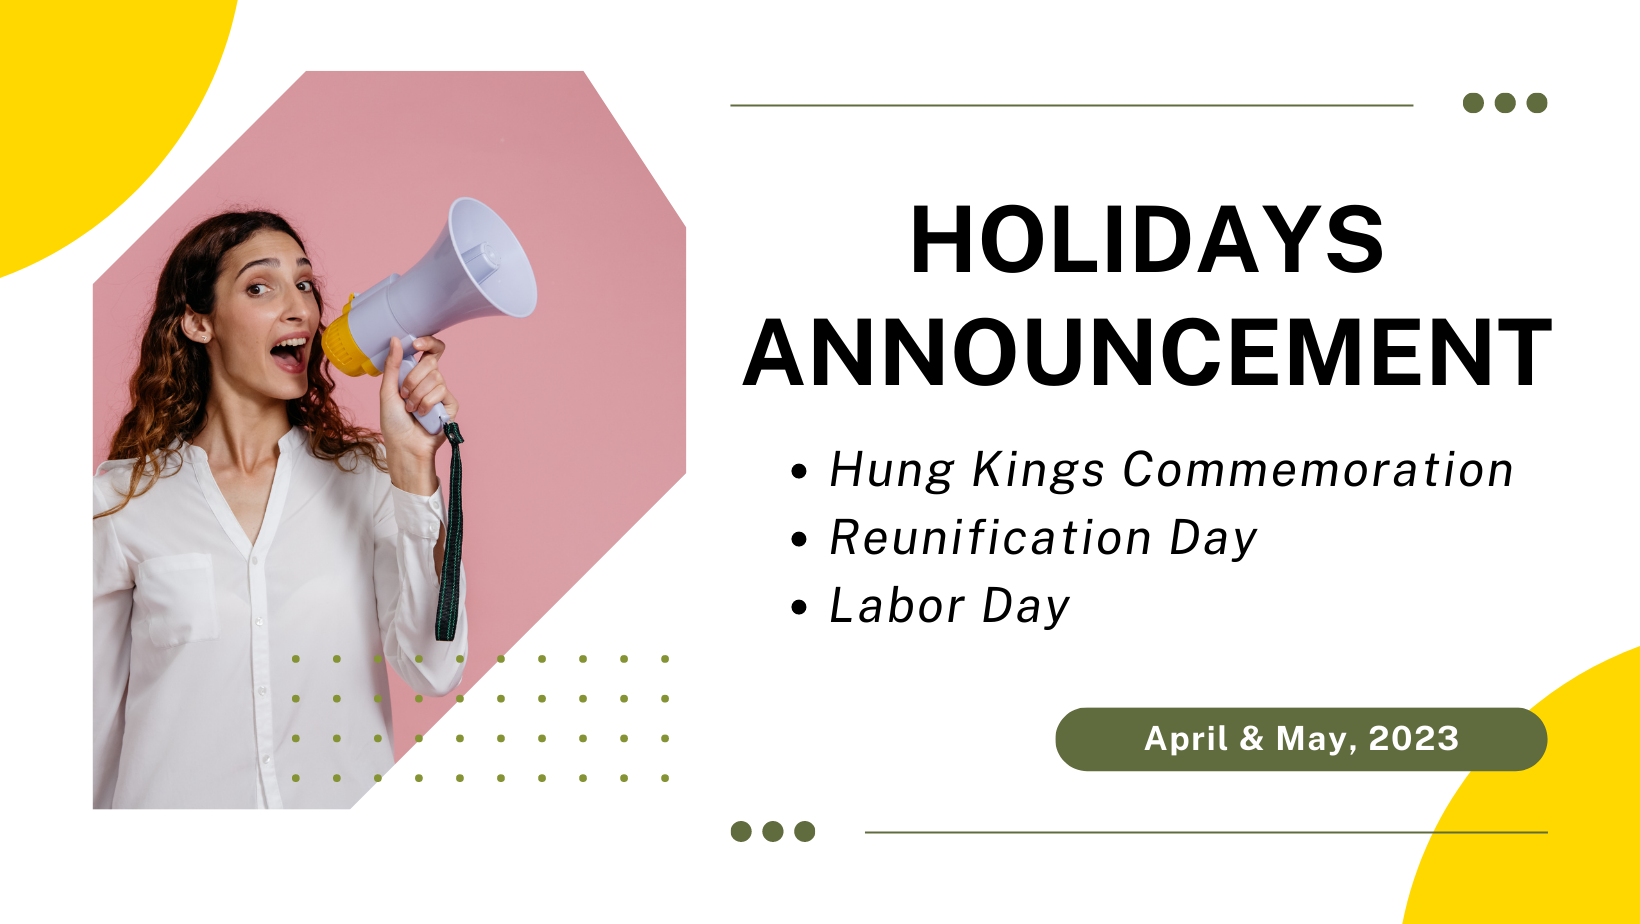 ANNOUNCEMENT OF HOLIDAYS IN APRIL & MAY/2023